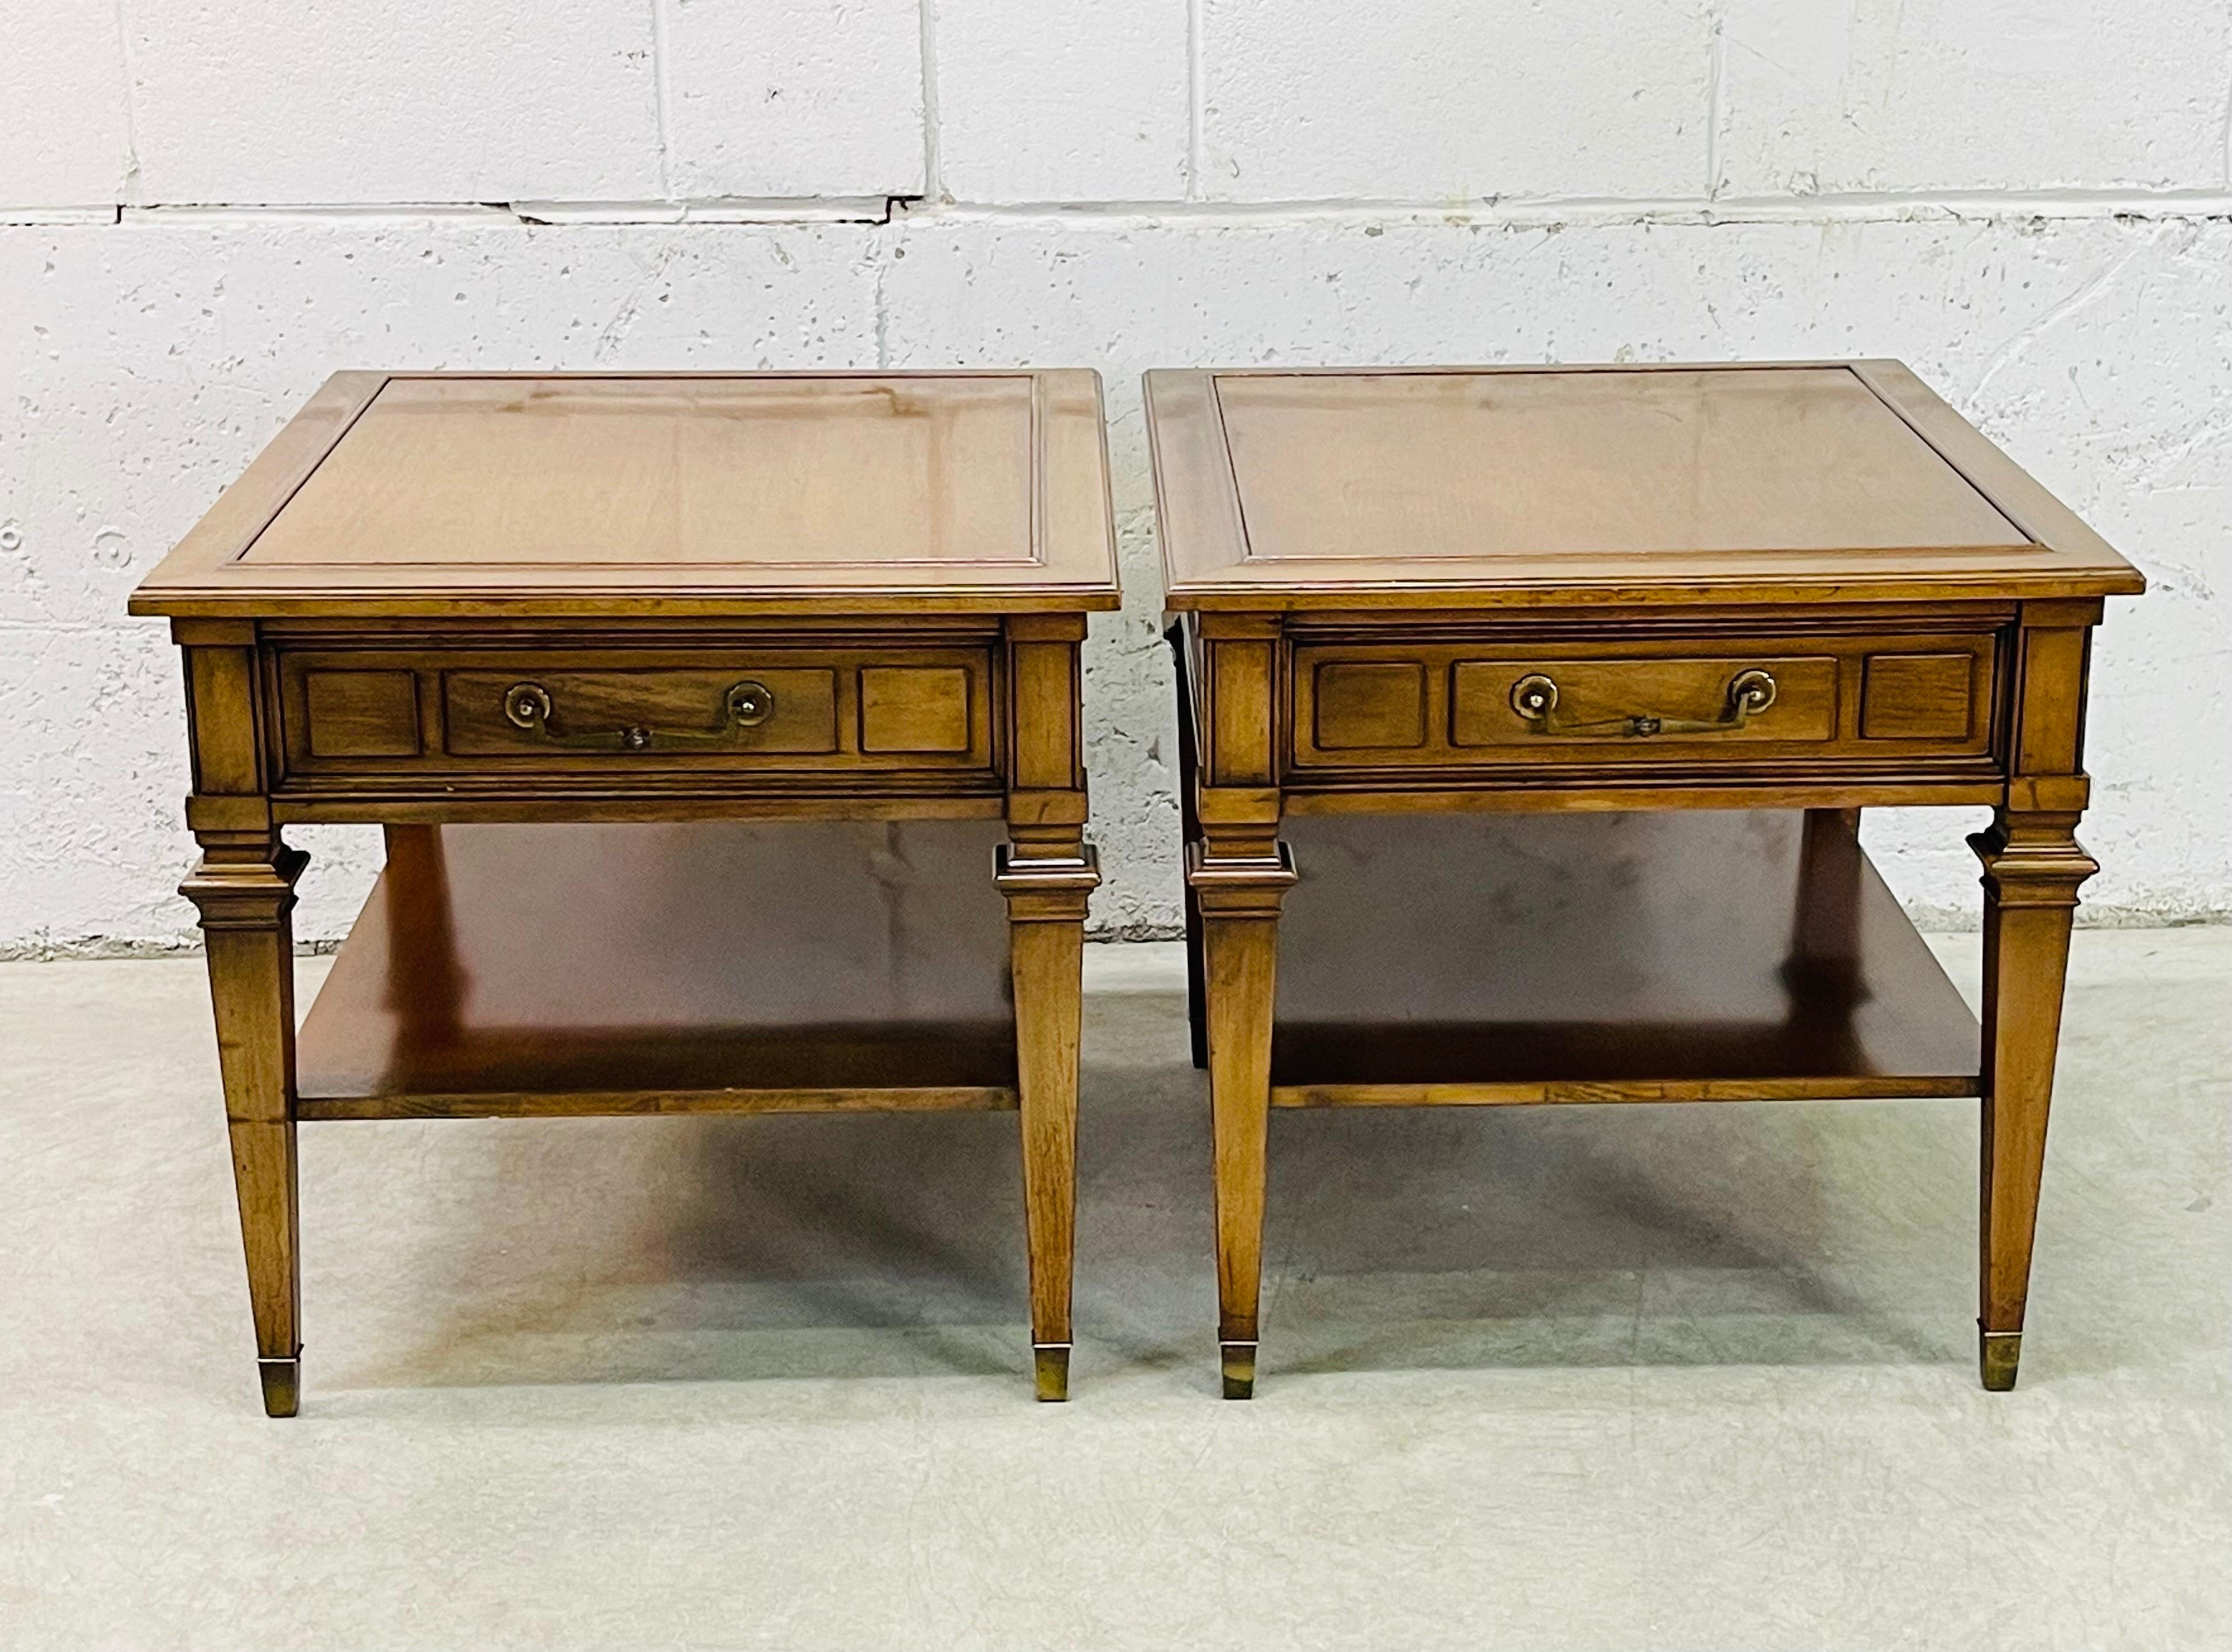 Vintage 1960s pair of Hekman rectangular side tables with a single drawer for storage. Both tables also have an additional open shelf and brass pulls and accents. The shelf is 8”H. Marked in the drawer.